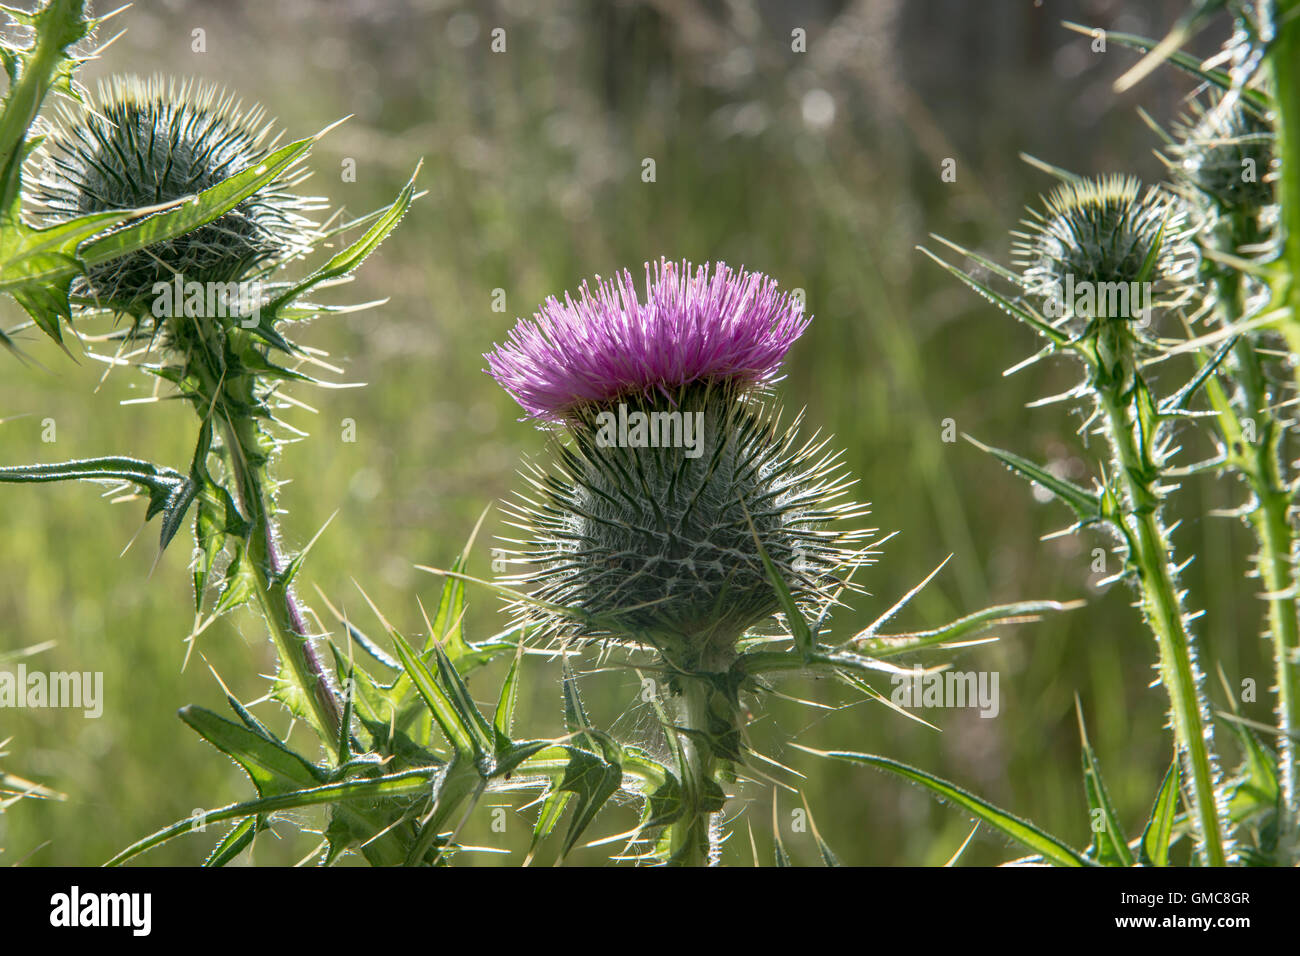 Cirsium vulgare - Other names are Scots Thistle, Scottish Thistle, Spear Thistle, Bull thistle, or Common Thistle. Stock Photo